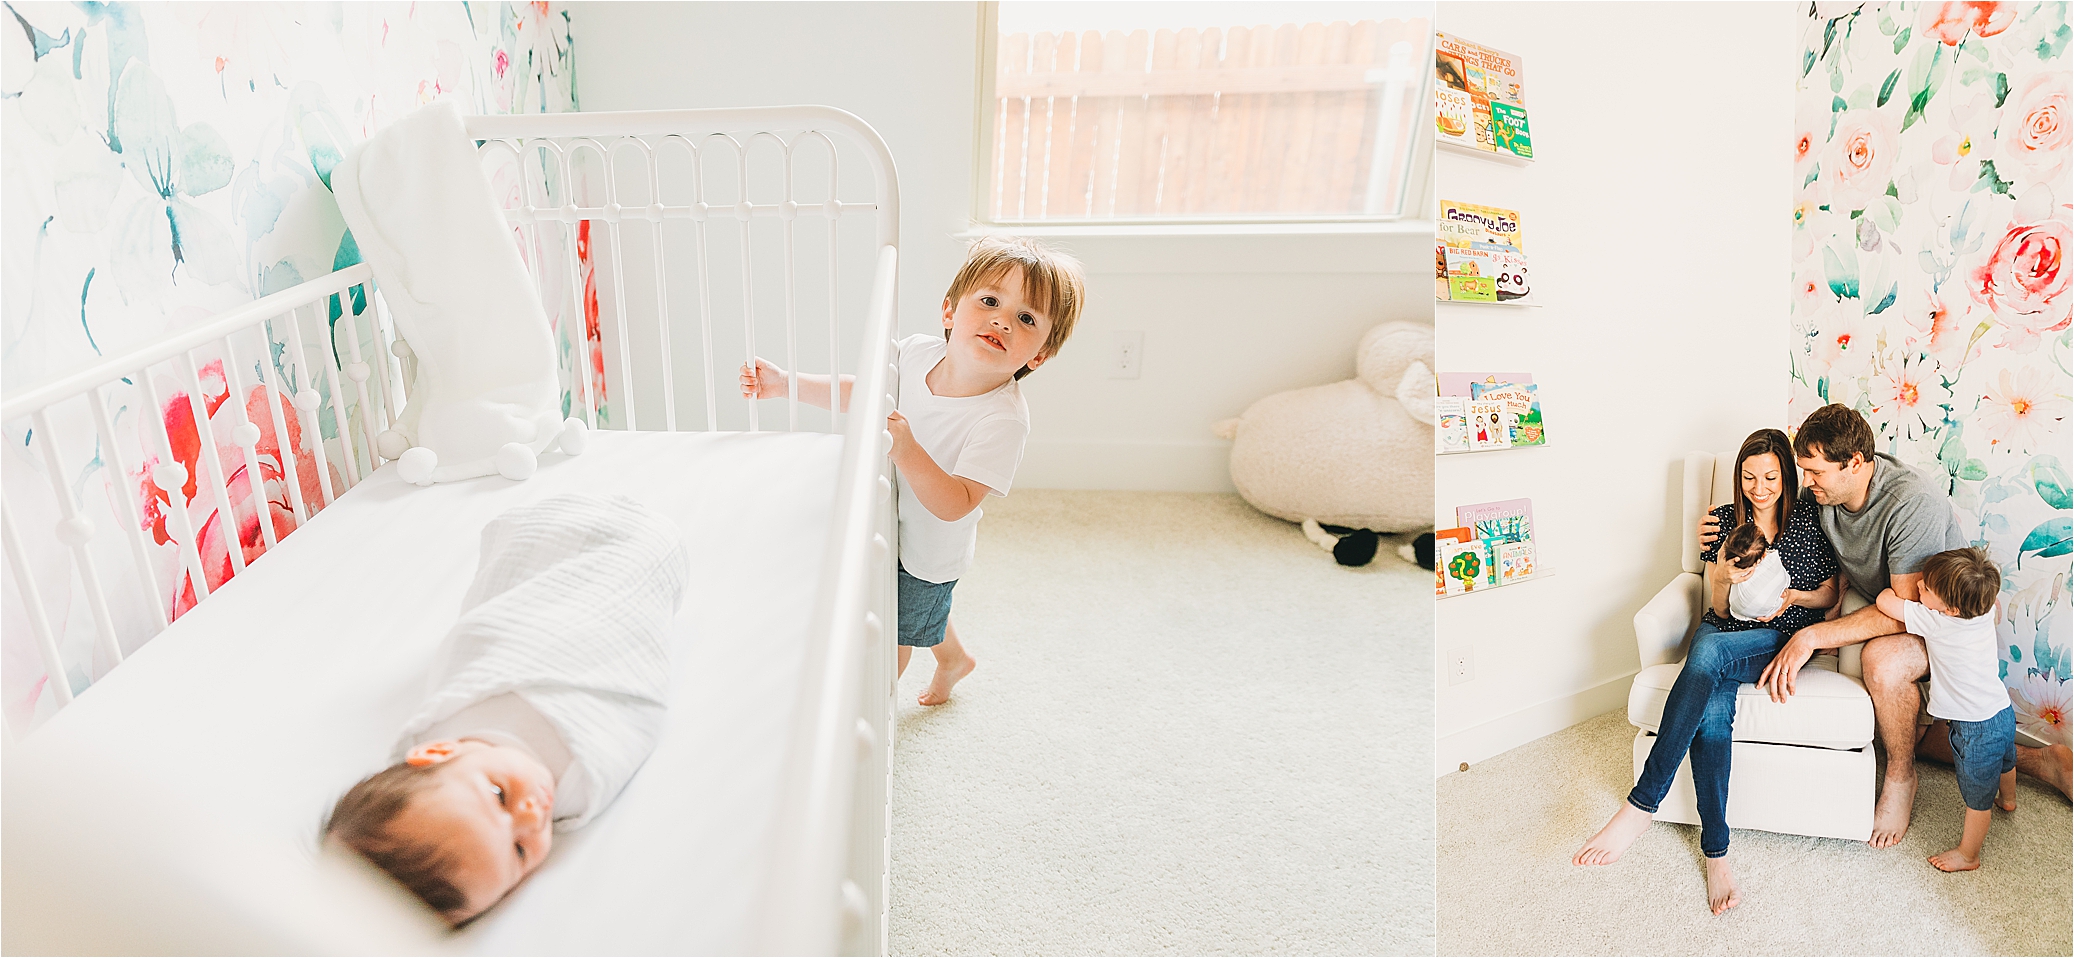 McKinney lifestyle newborn session inside a client's home in the baby's nursery 